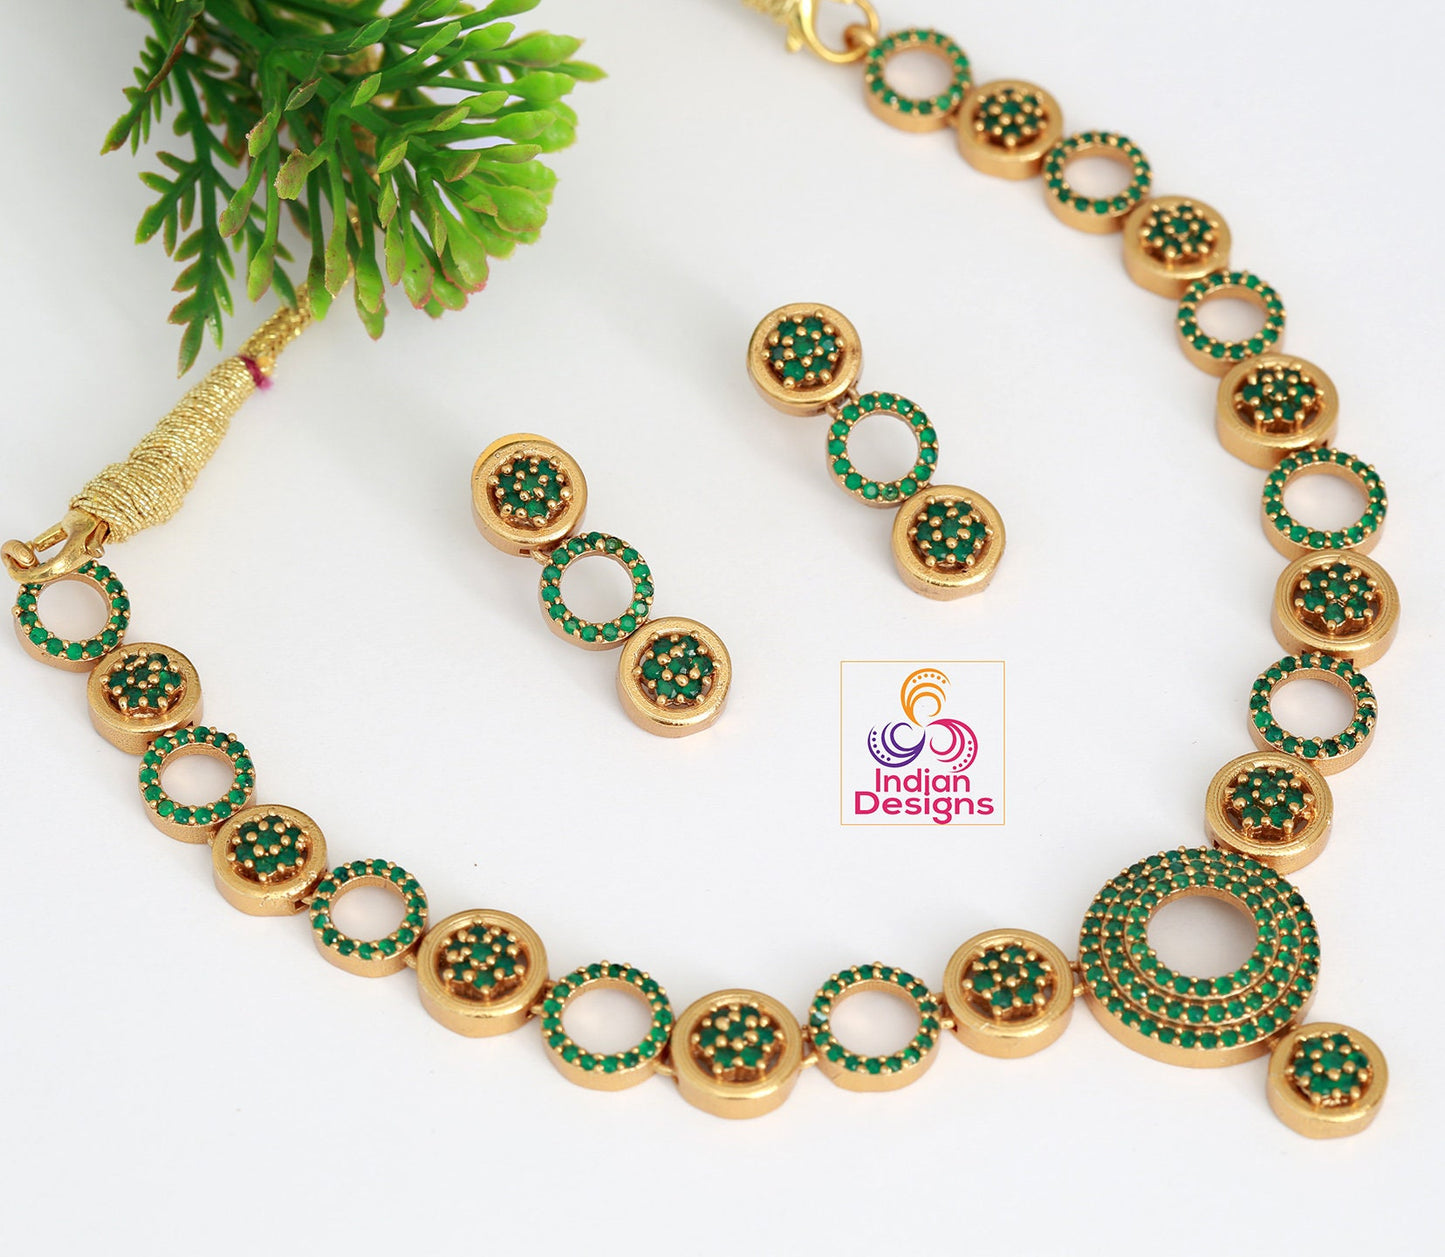 Matte Finish small South Indian choker Earring set |American Diamond Ruby Emerald stone studded Circle design necklace Jewelry |Gift for her